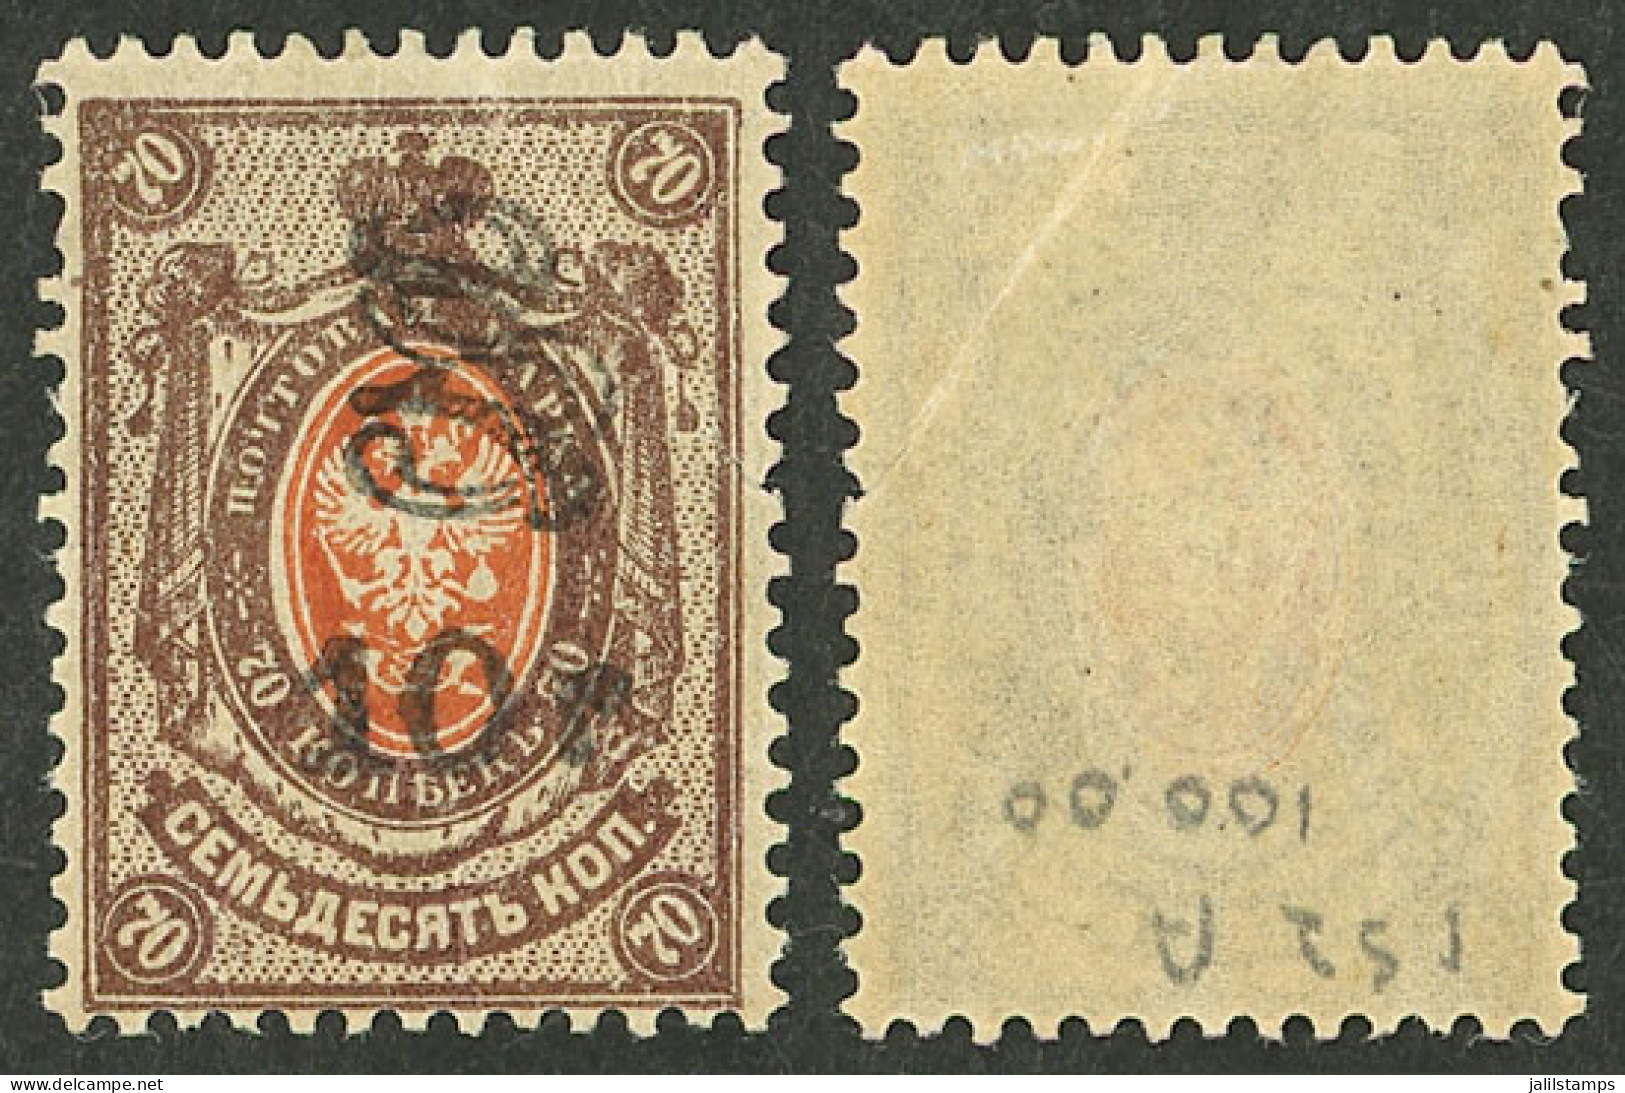 ARMENIA: Sc.152Ab, 1919 10r. On 7070, Perforated, Mint Very Lightly Hinged But With A Crease That Produced A Partial Tea - Armenien